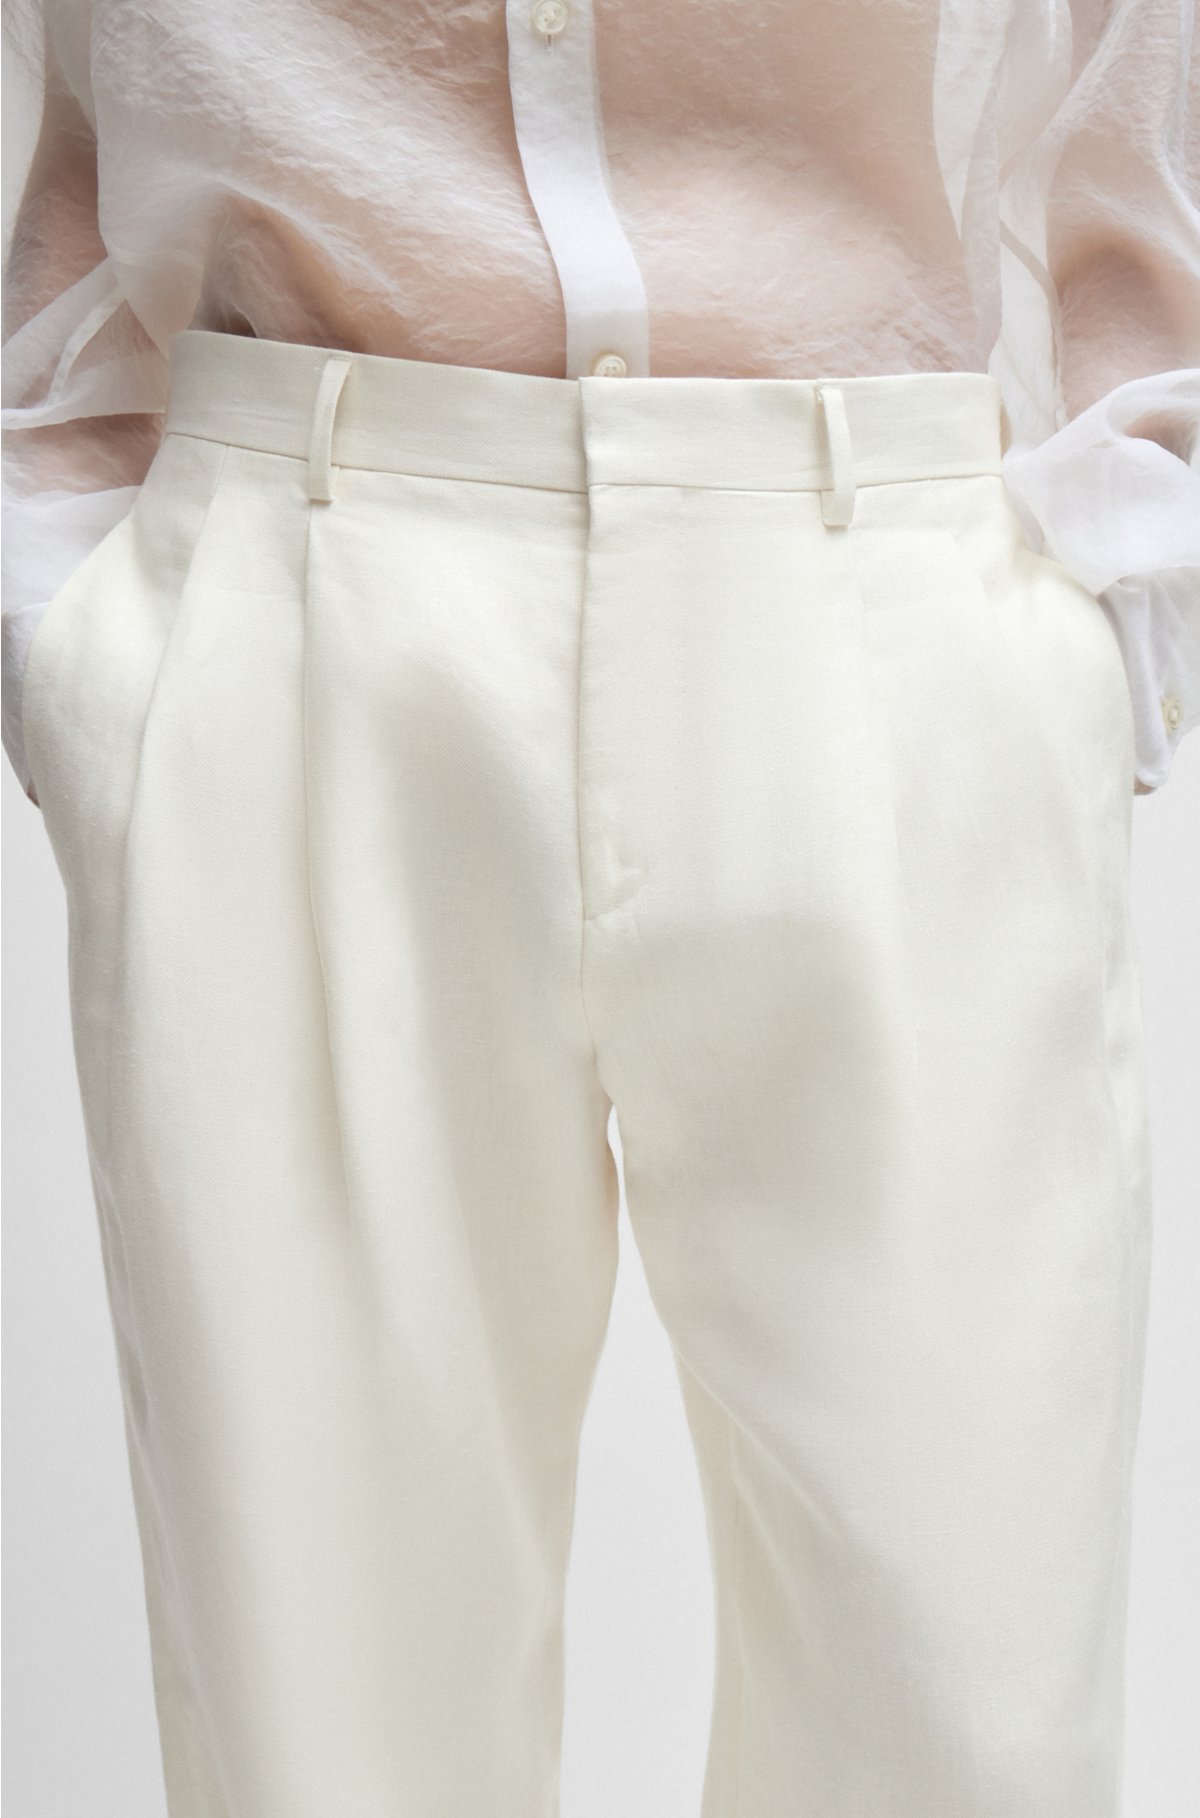 Relaxed-fit trousers in micro-patterned linen, White